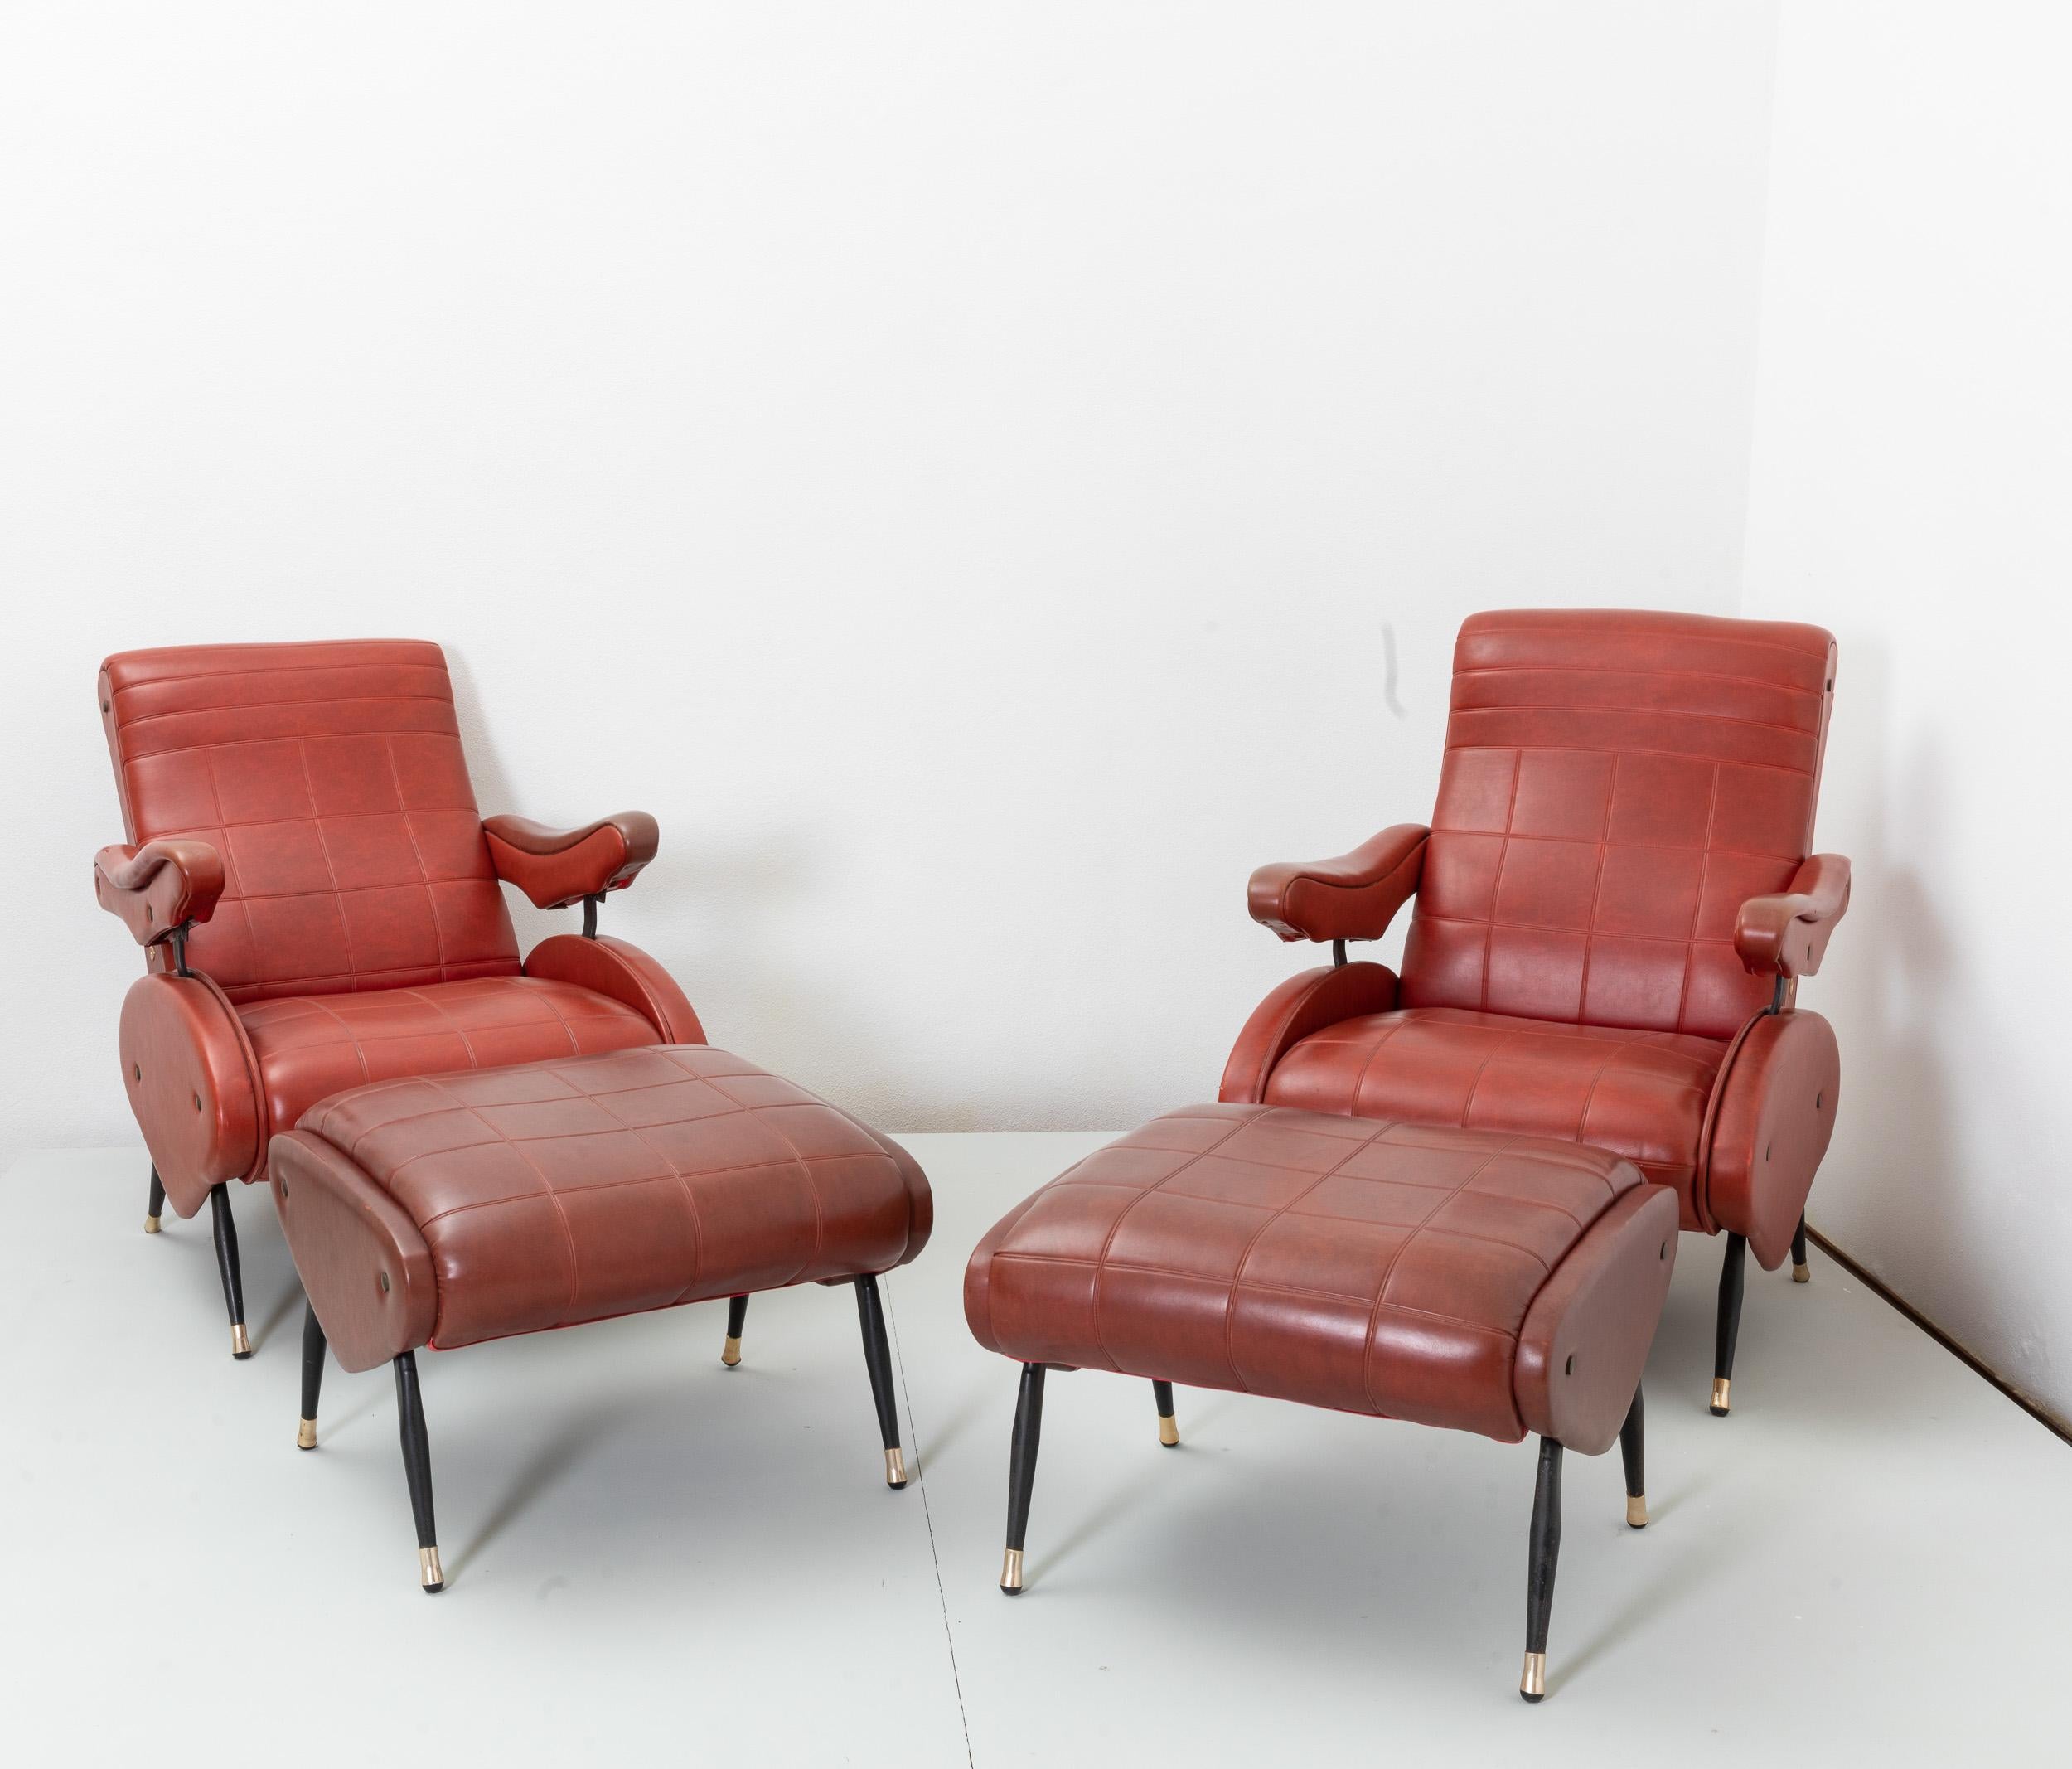 Mid-20th Century Nello Pini Prod. Novarredo c. 1950-1960 Two reclining armchairs and two pouffs